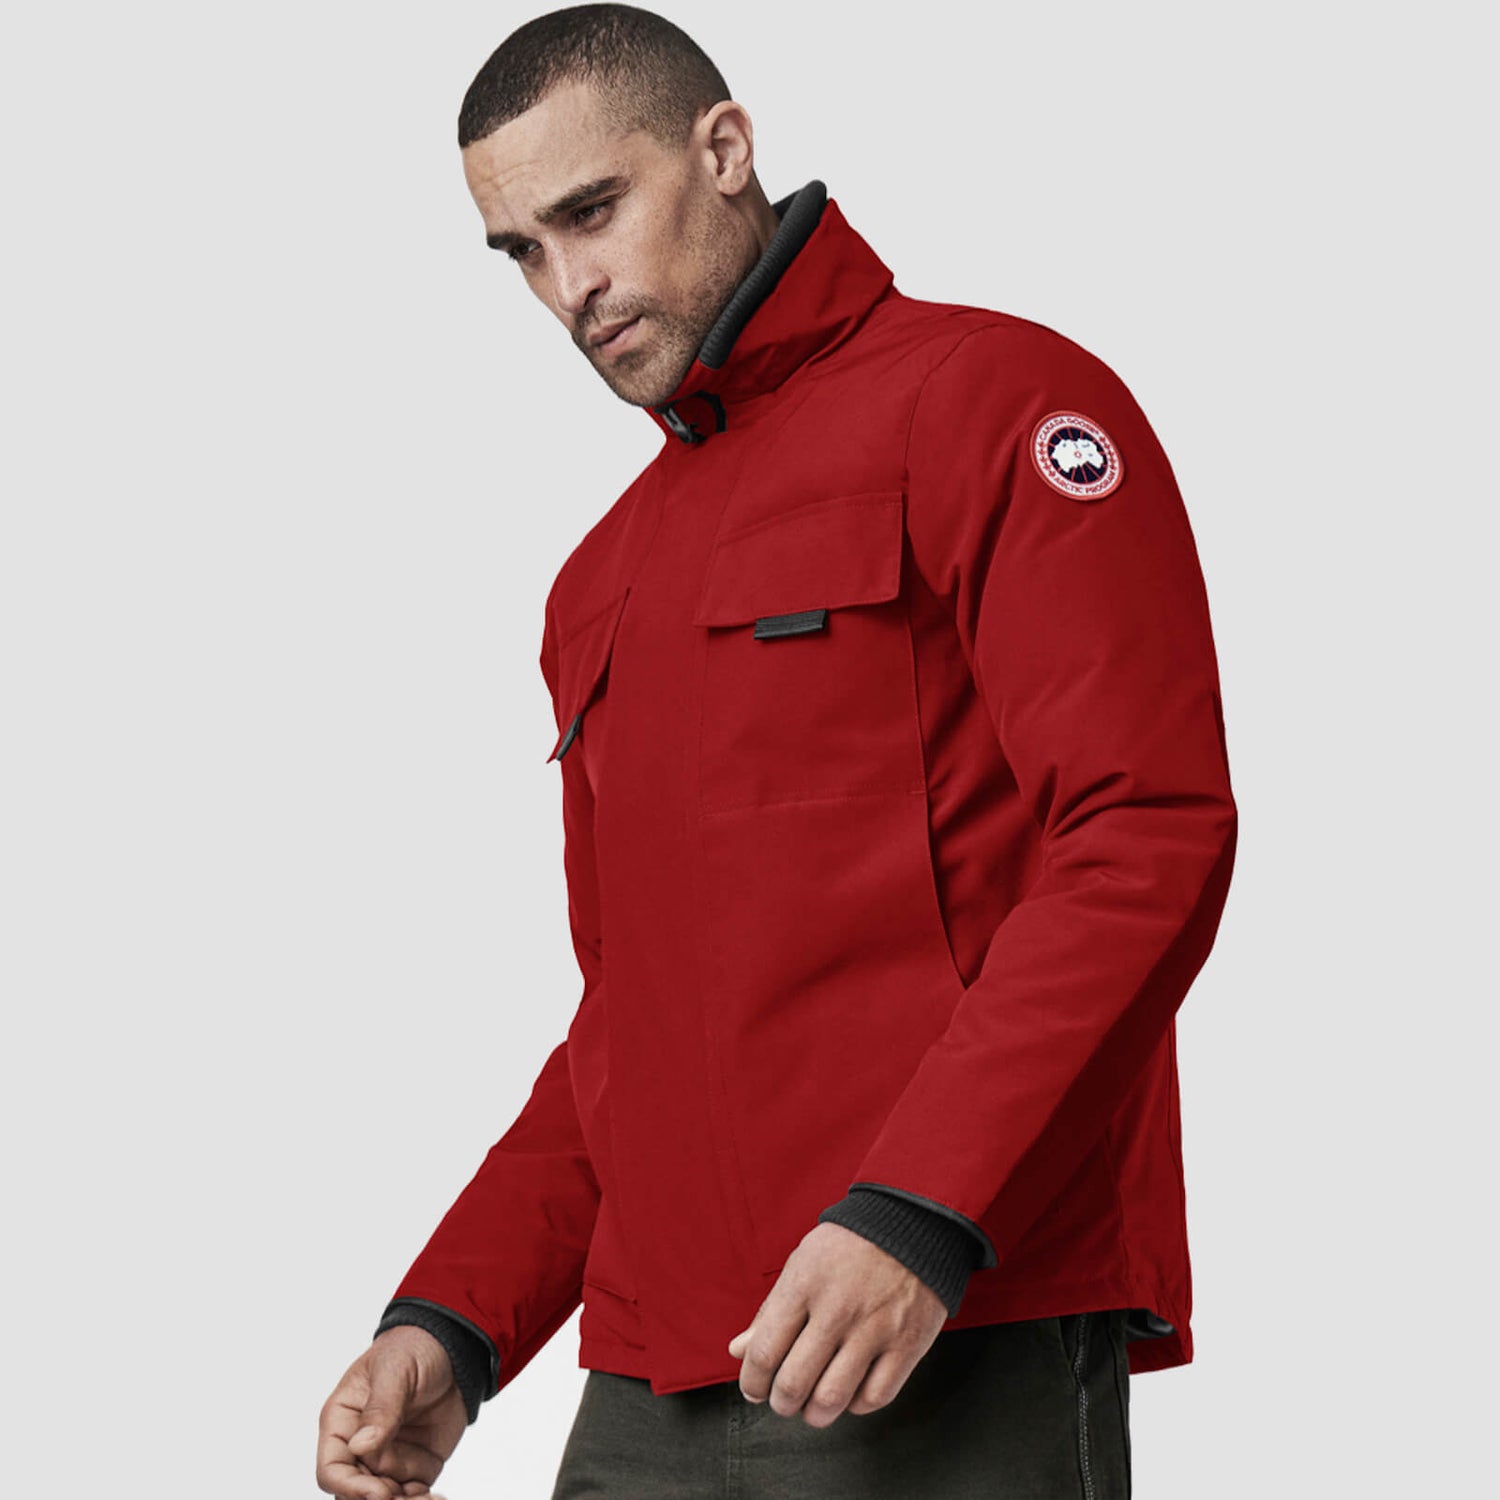 Canada Goose Men's Forester Jacket - Red - S